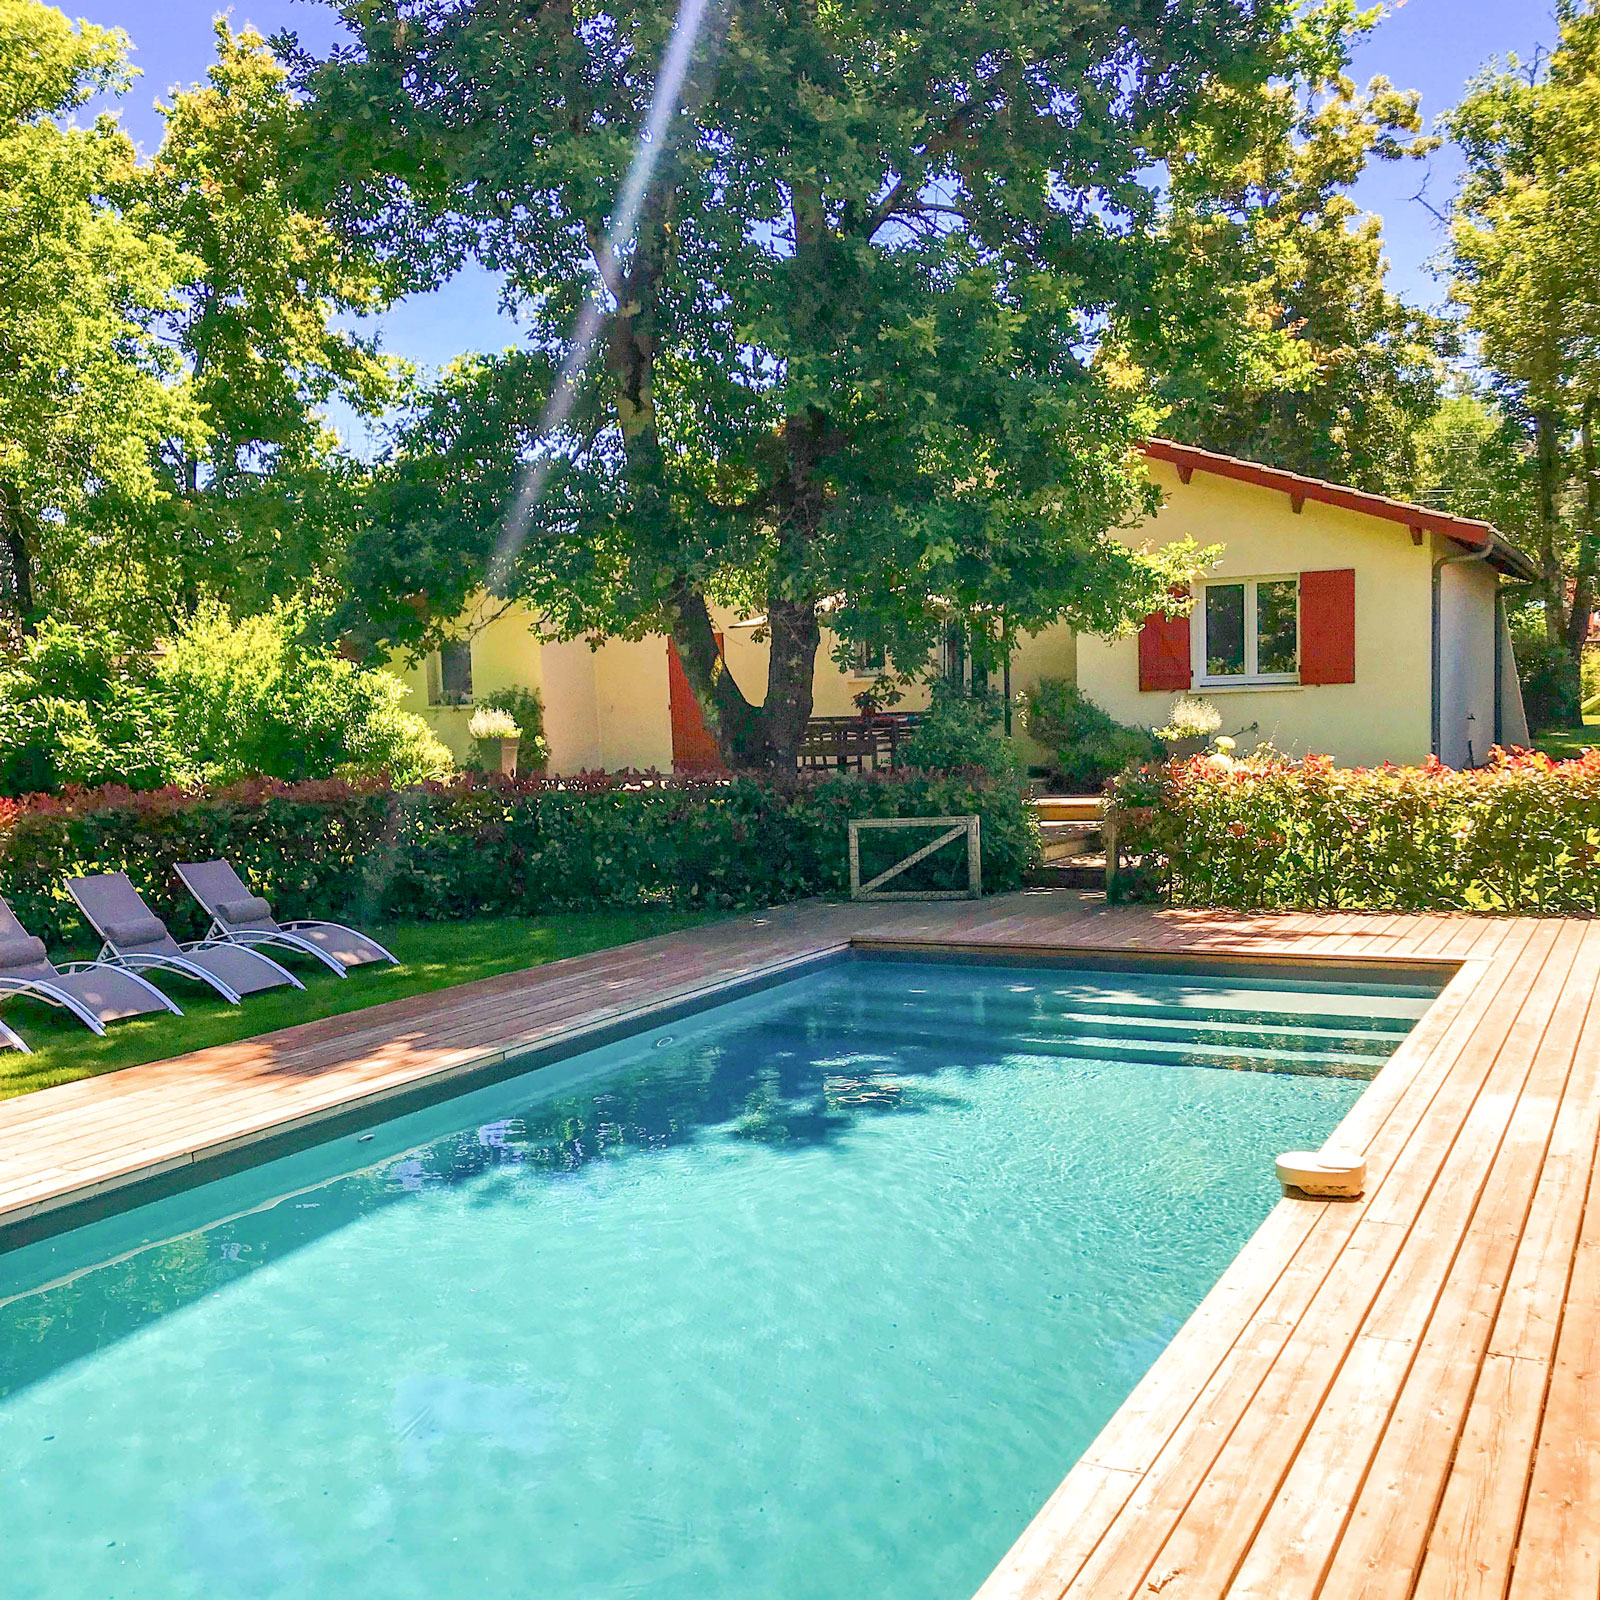 Villa des Pins Grand Cru. Bordeaux city accommodation with a private heated pool